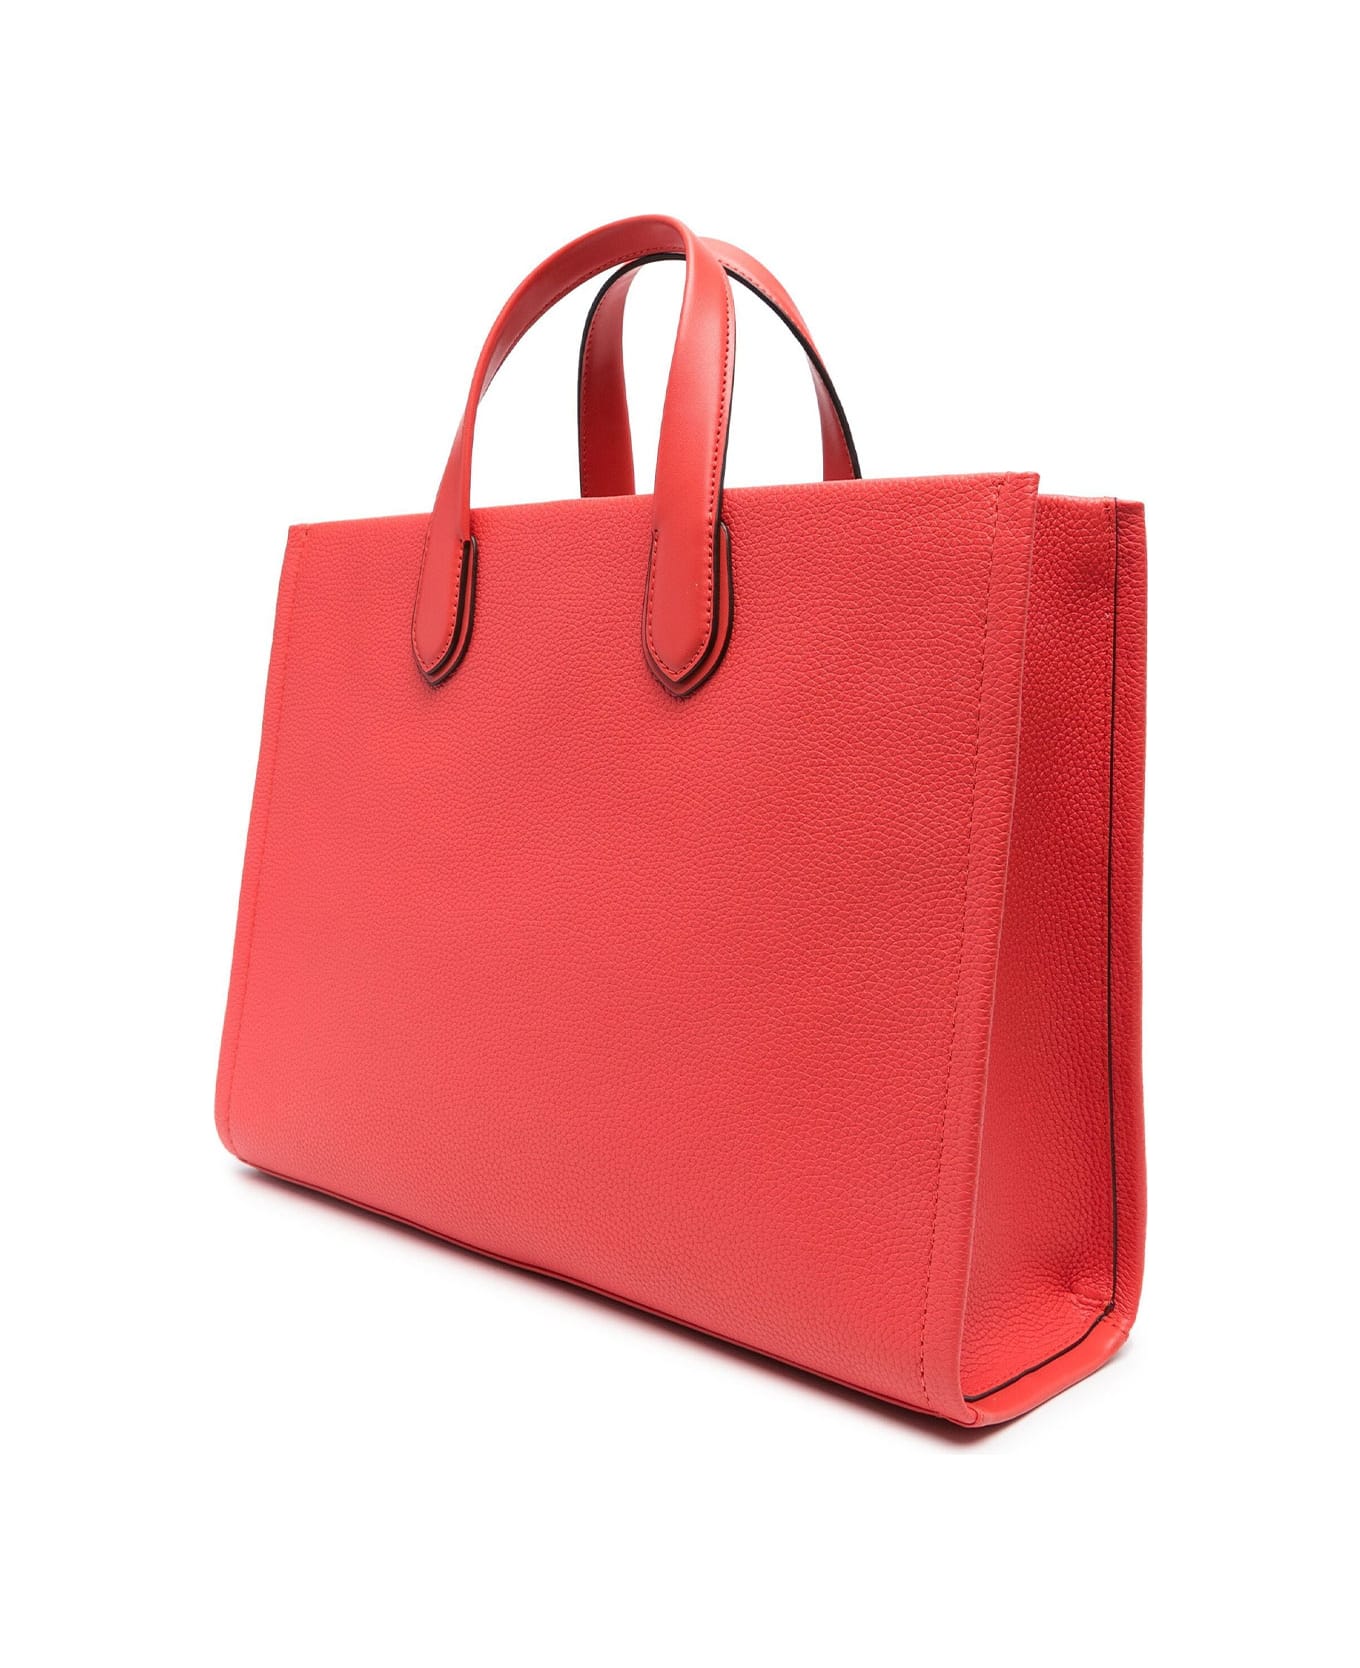 Michael Kors Large Tote Bag With Logo - SPICED CORAL トートバッグ